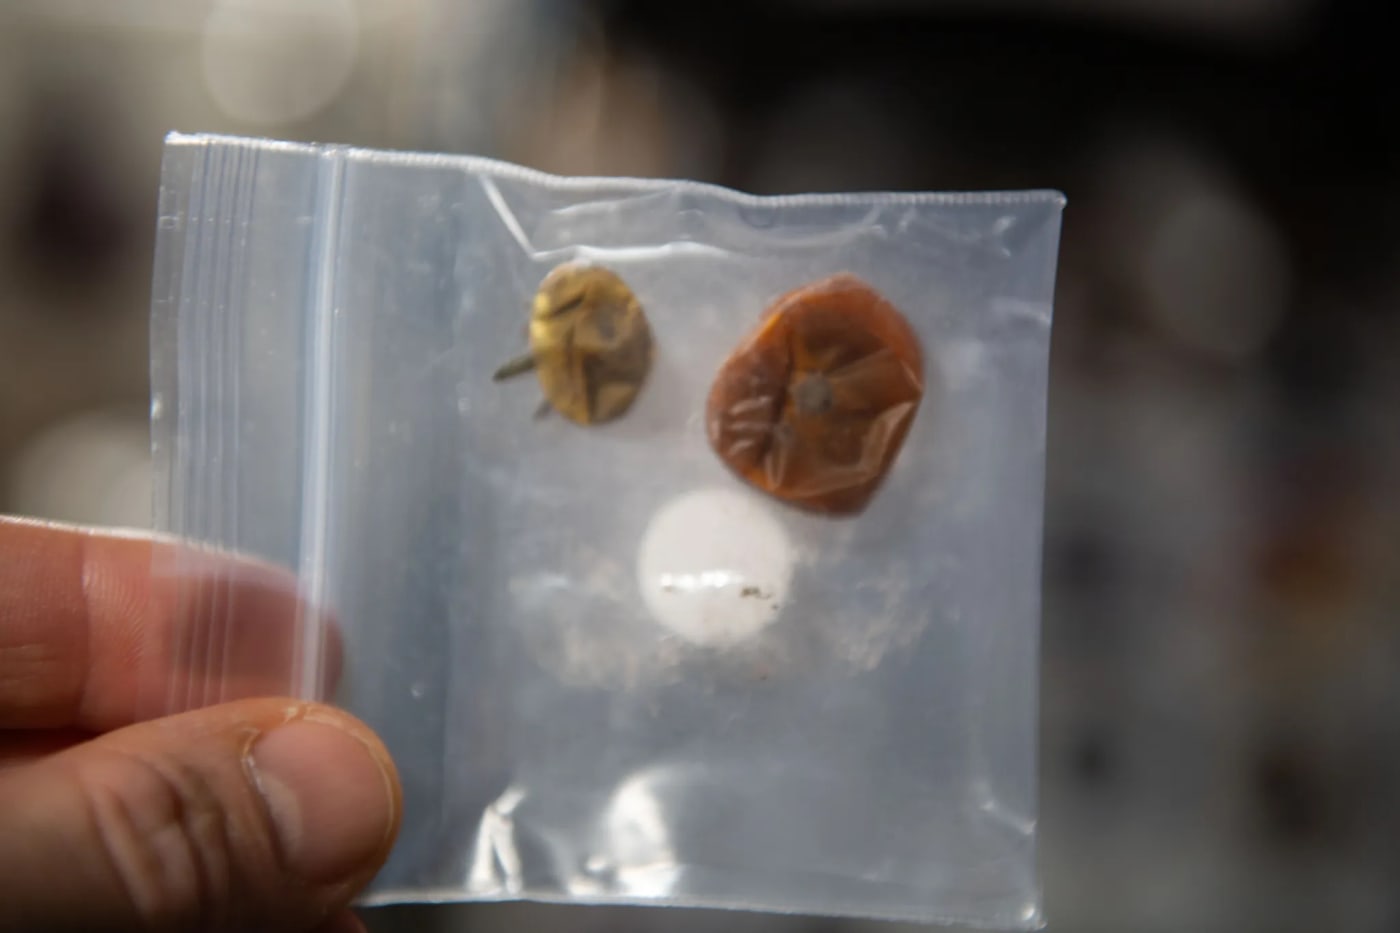 These tomatoes were lost on the International Space Station for almost a year